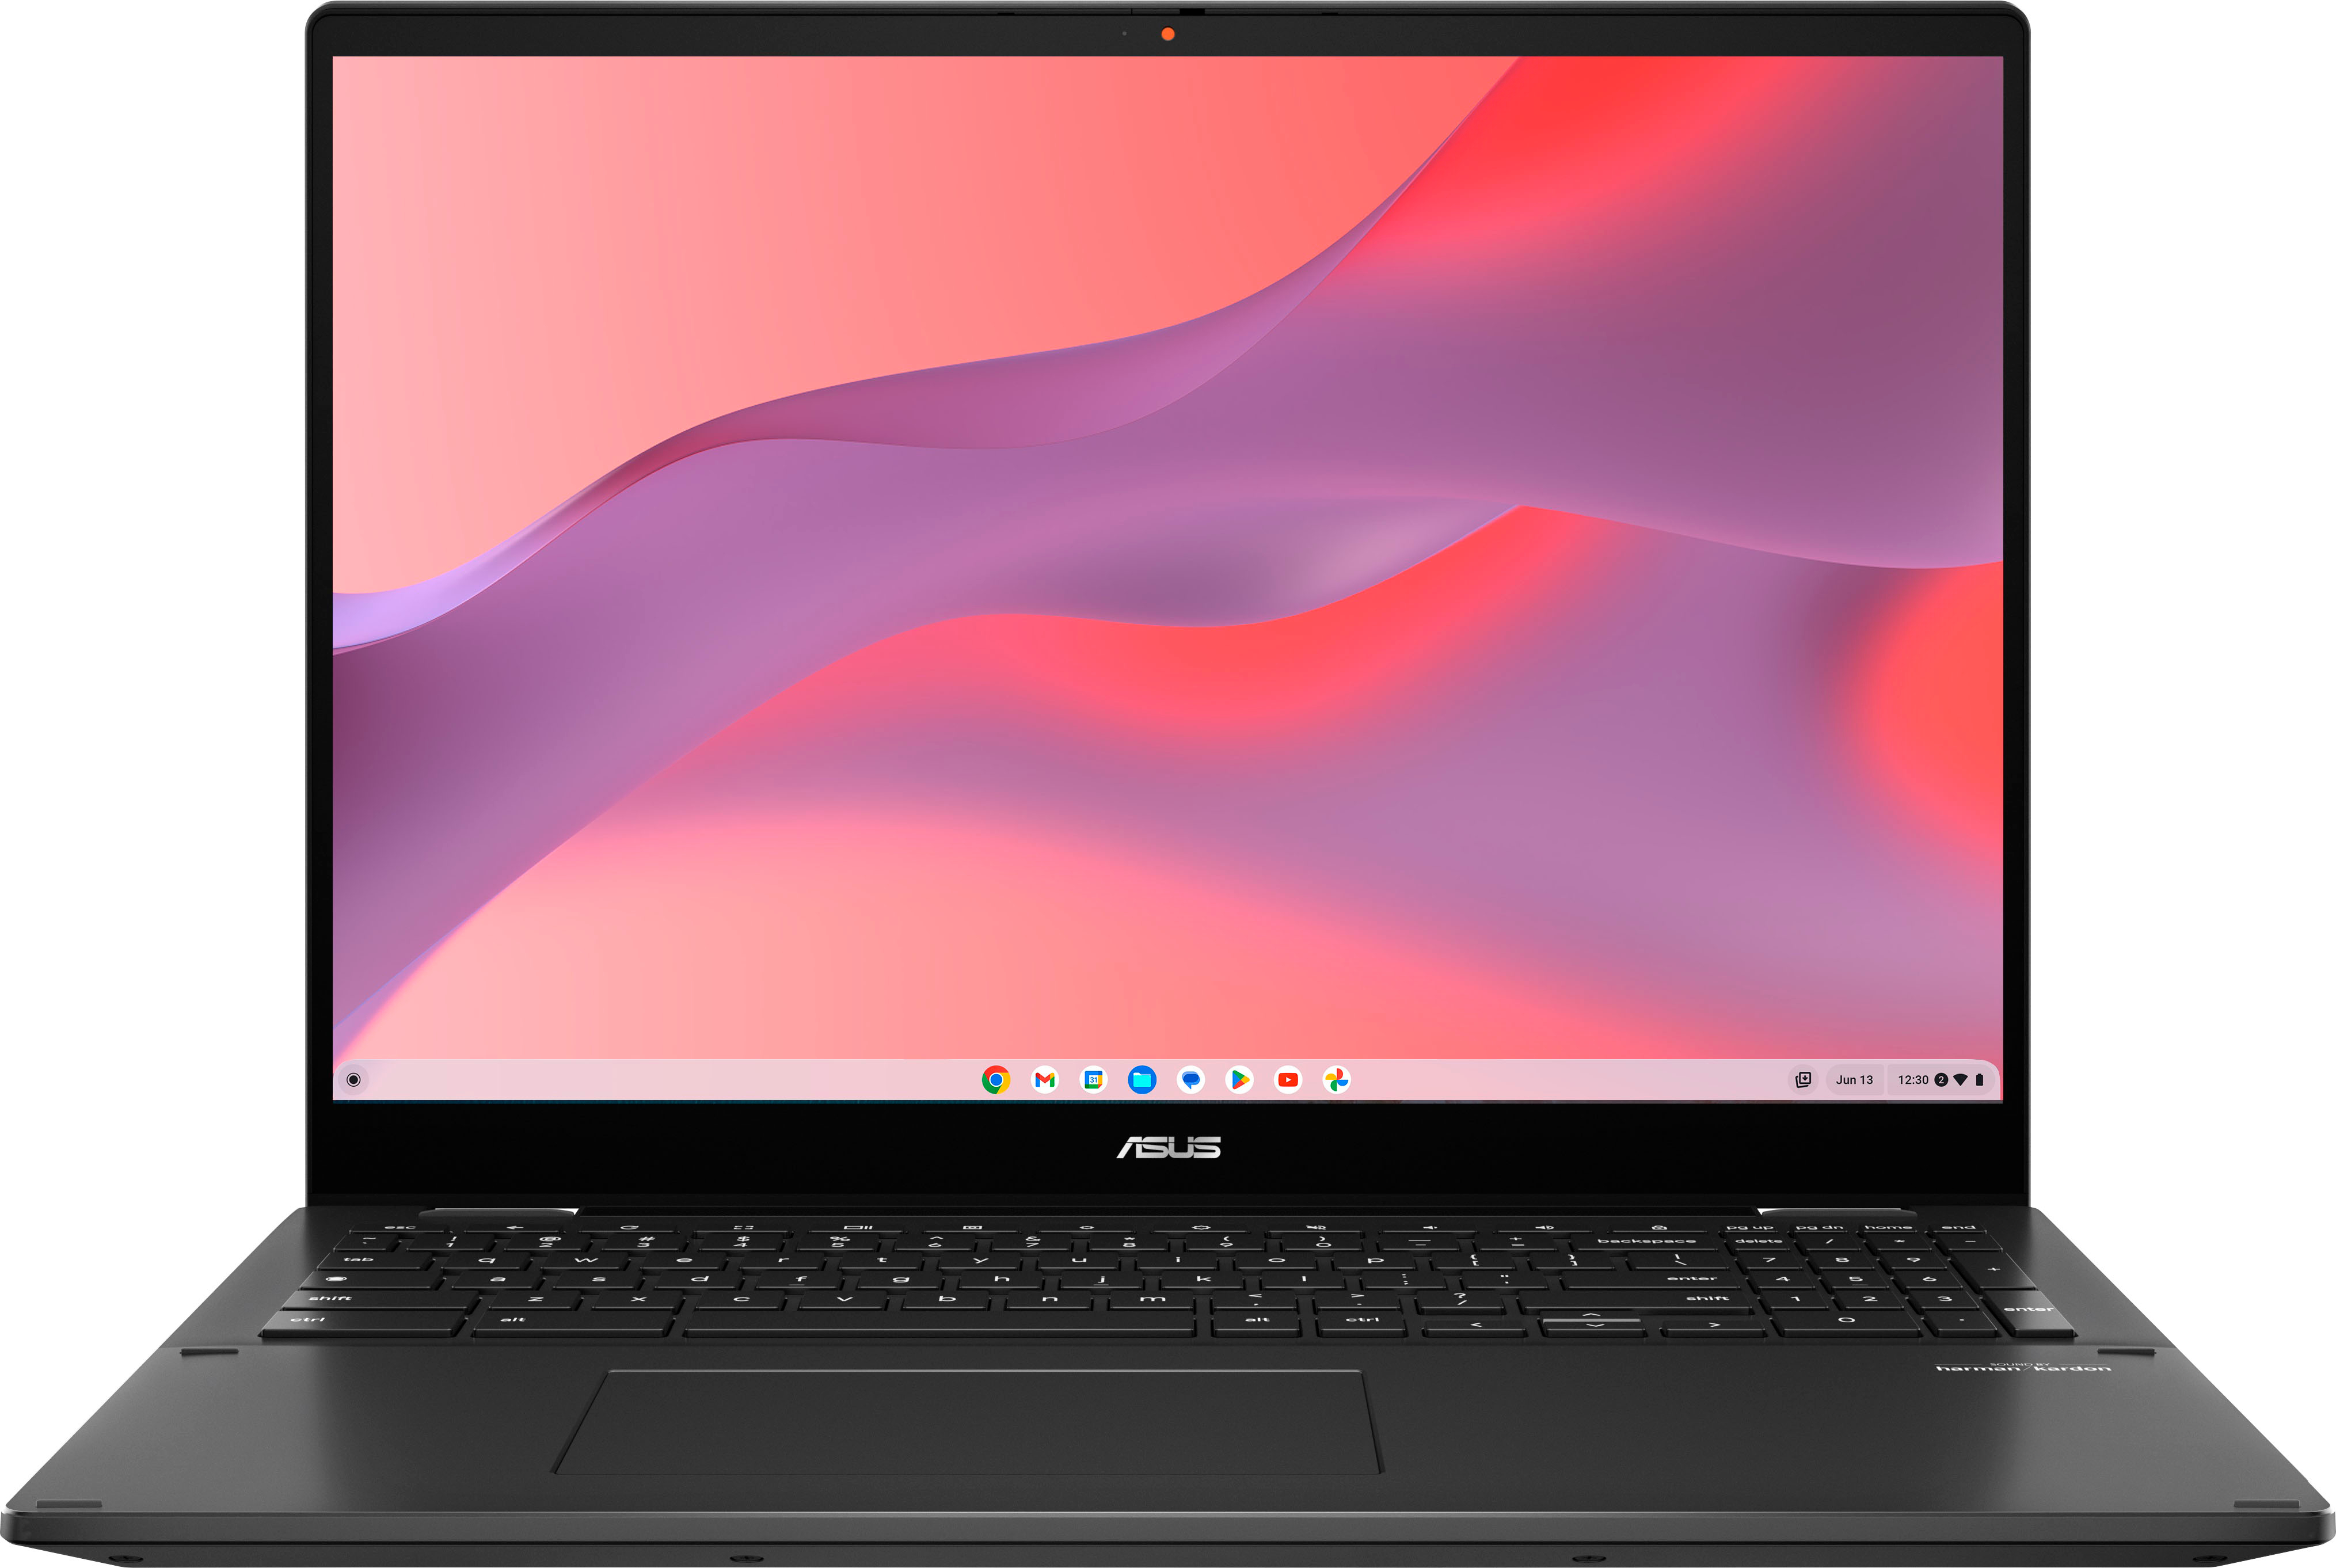 ASUS Chromebook CX1 (CX1101)｜Laptops For Home｜ASUS USA